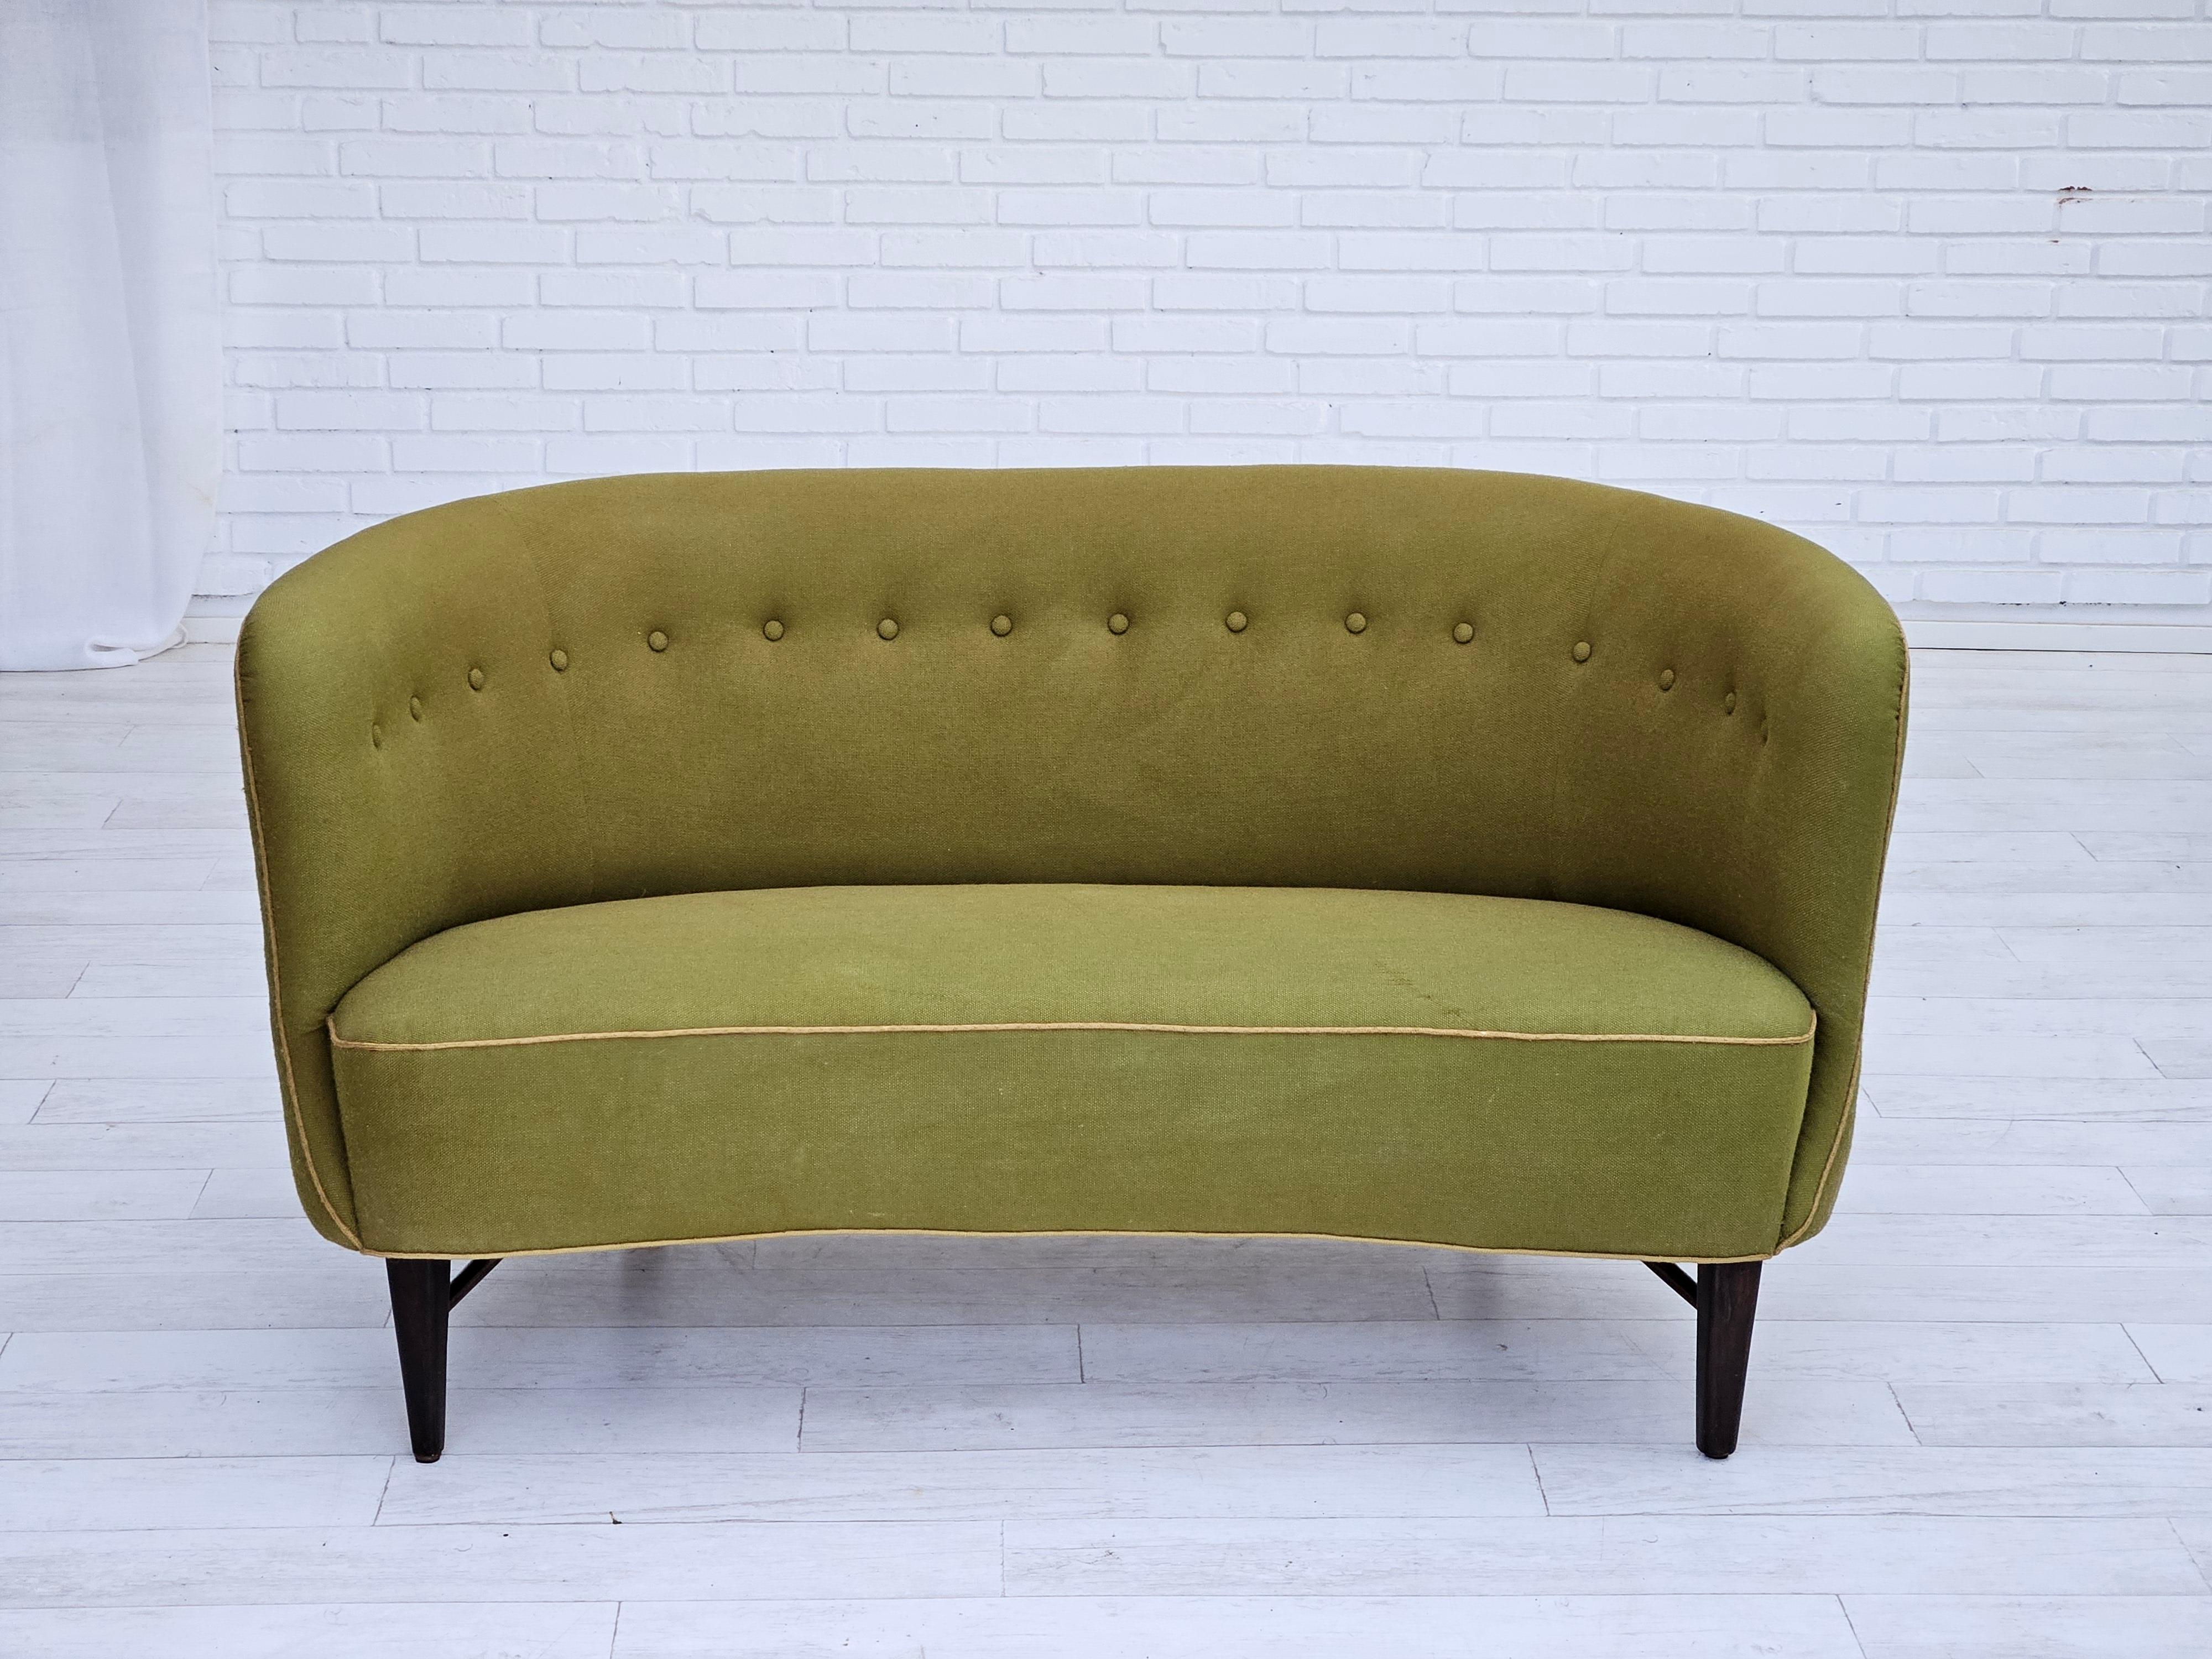 1960s, Danish two seater sofa. Original good condition: no smells and no stains. Furniture olive green wool fabric, dark oak wood legs. Springs in the seat. Manufactured by Danish furniture manufacturer in about 1960s.
